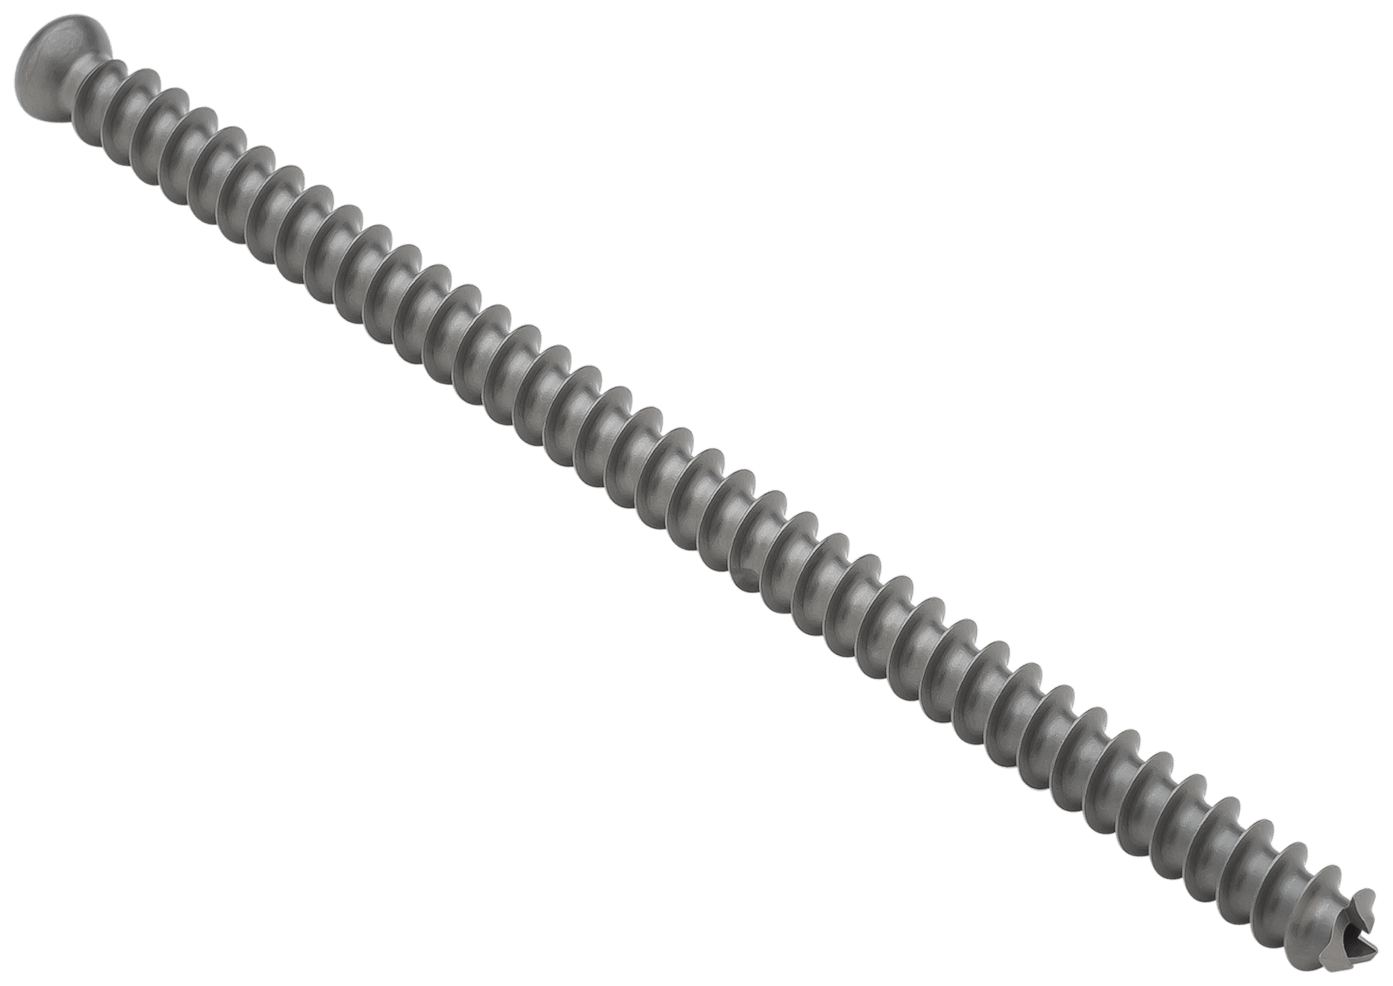 Low Profile Screw, 6.7 x 115 mm, Cannulated, Fully Threaded